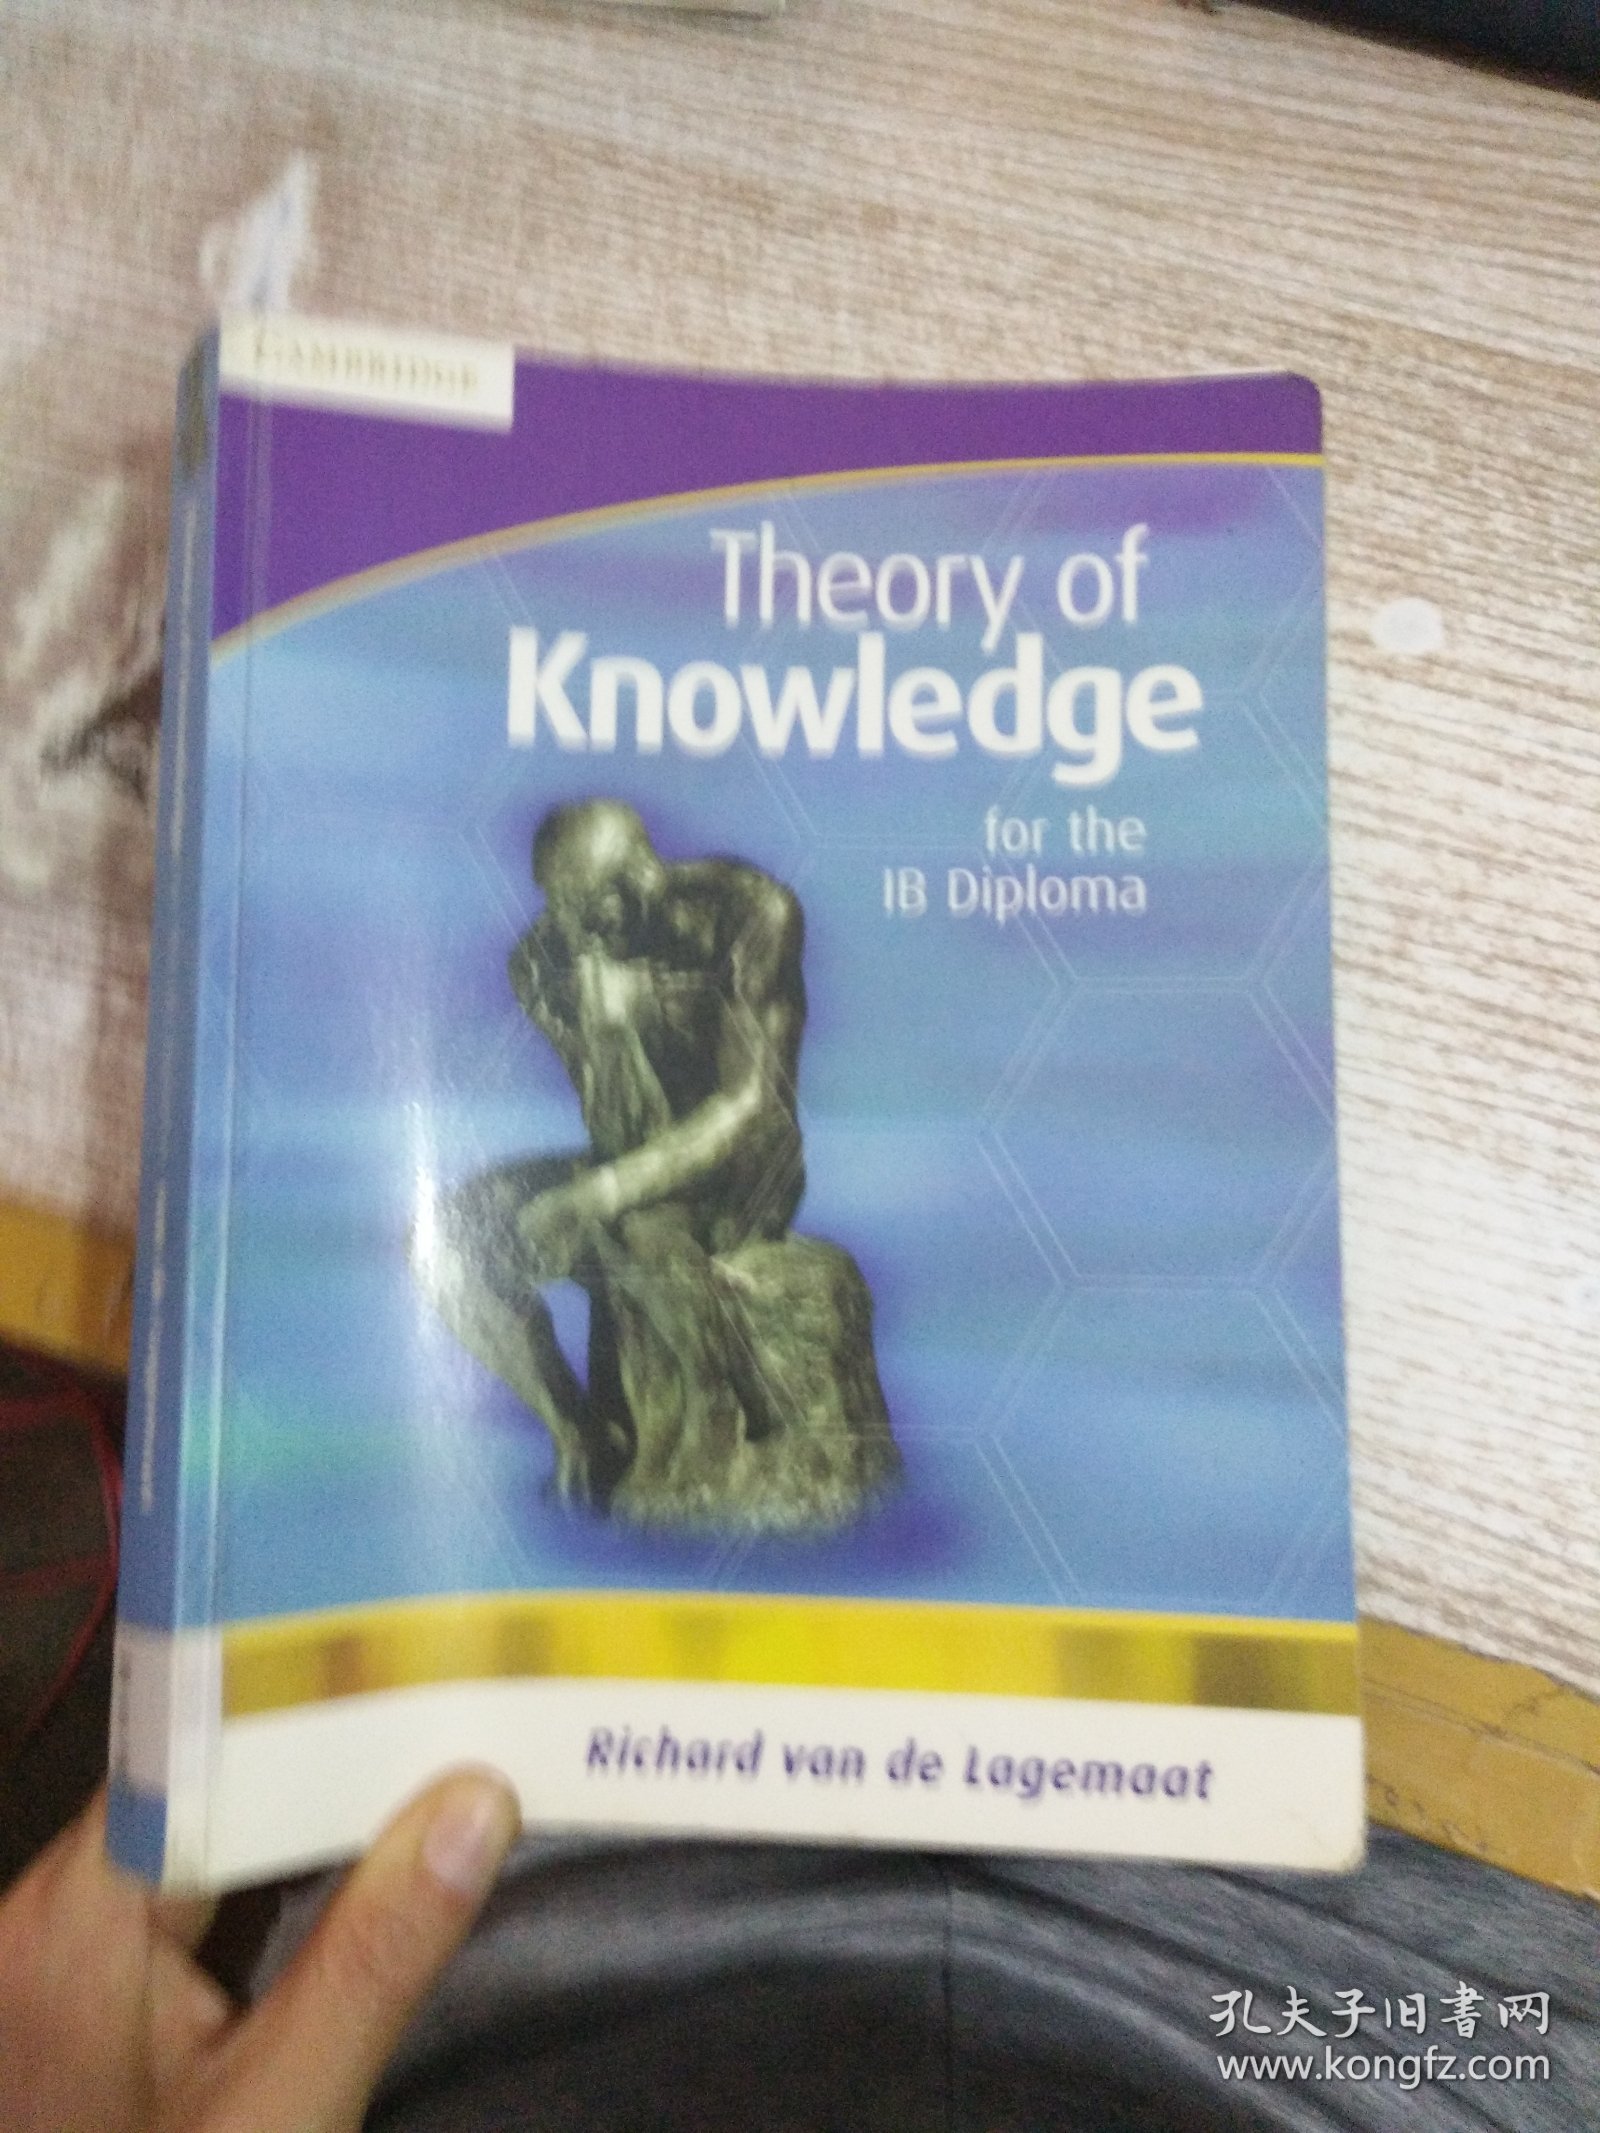 Theory of Knowledge for the IB Diploma：Of Knowledge For The Ib Diploma